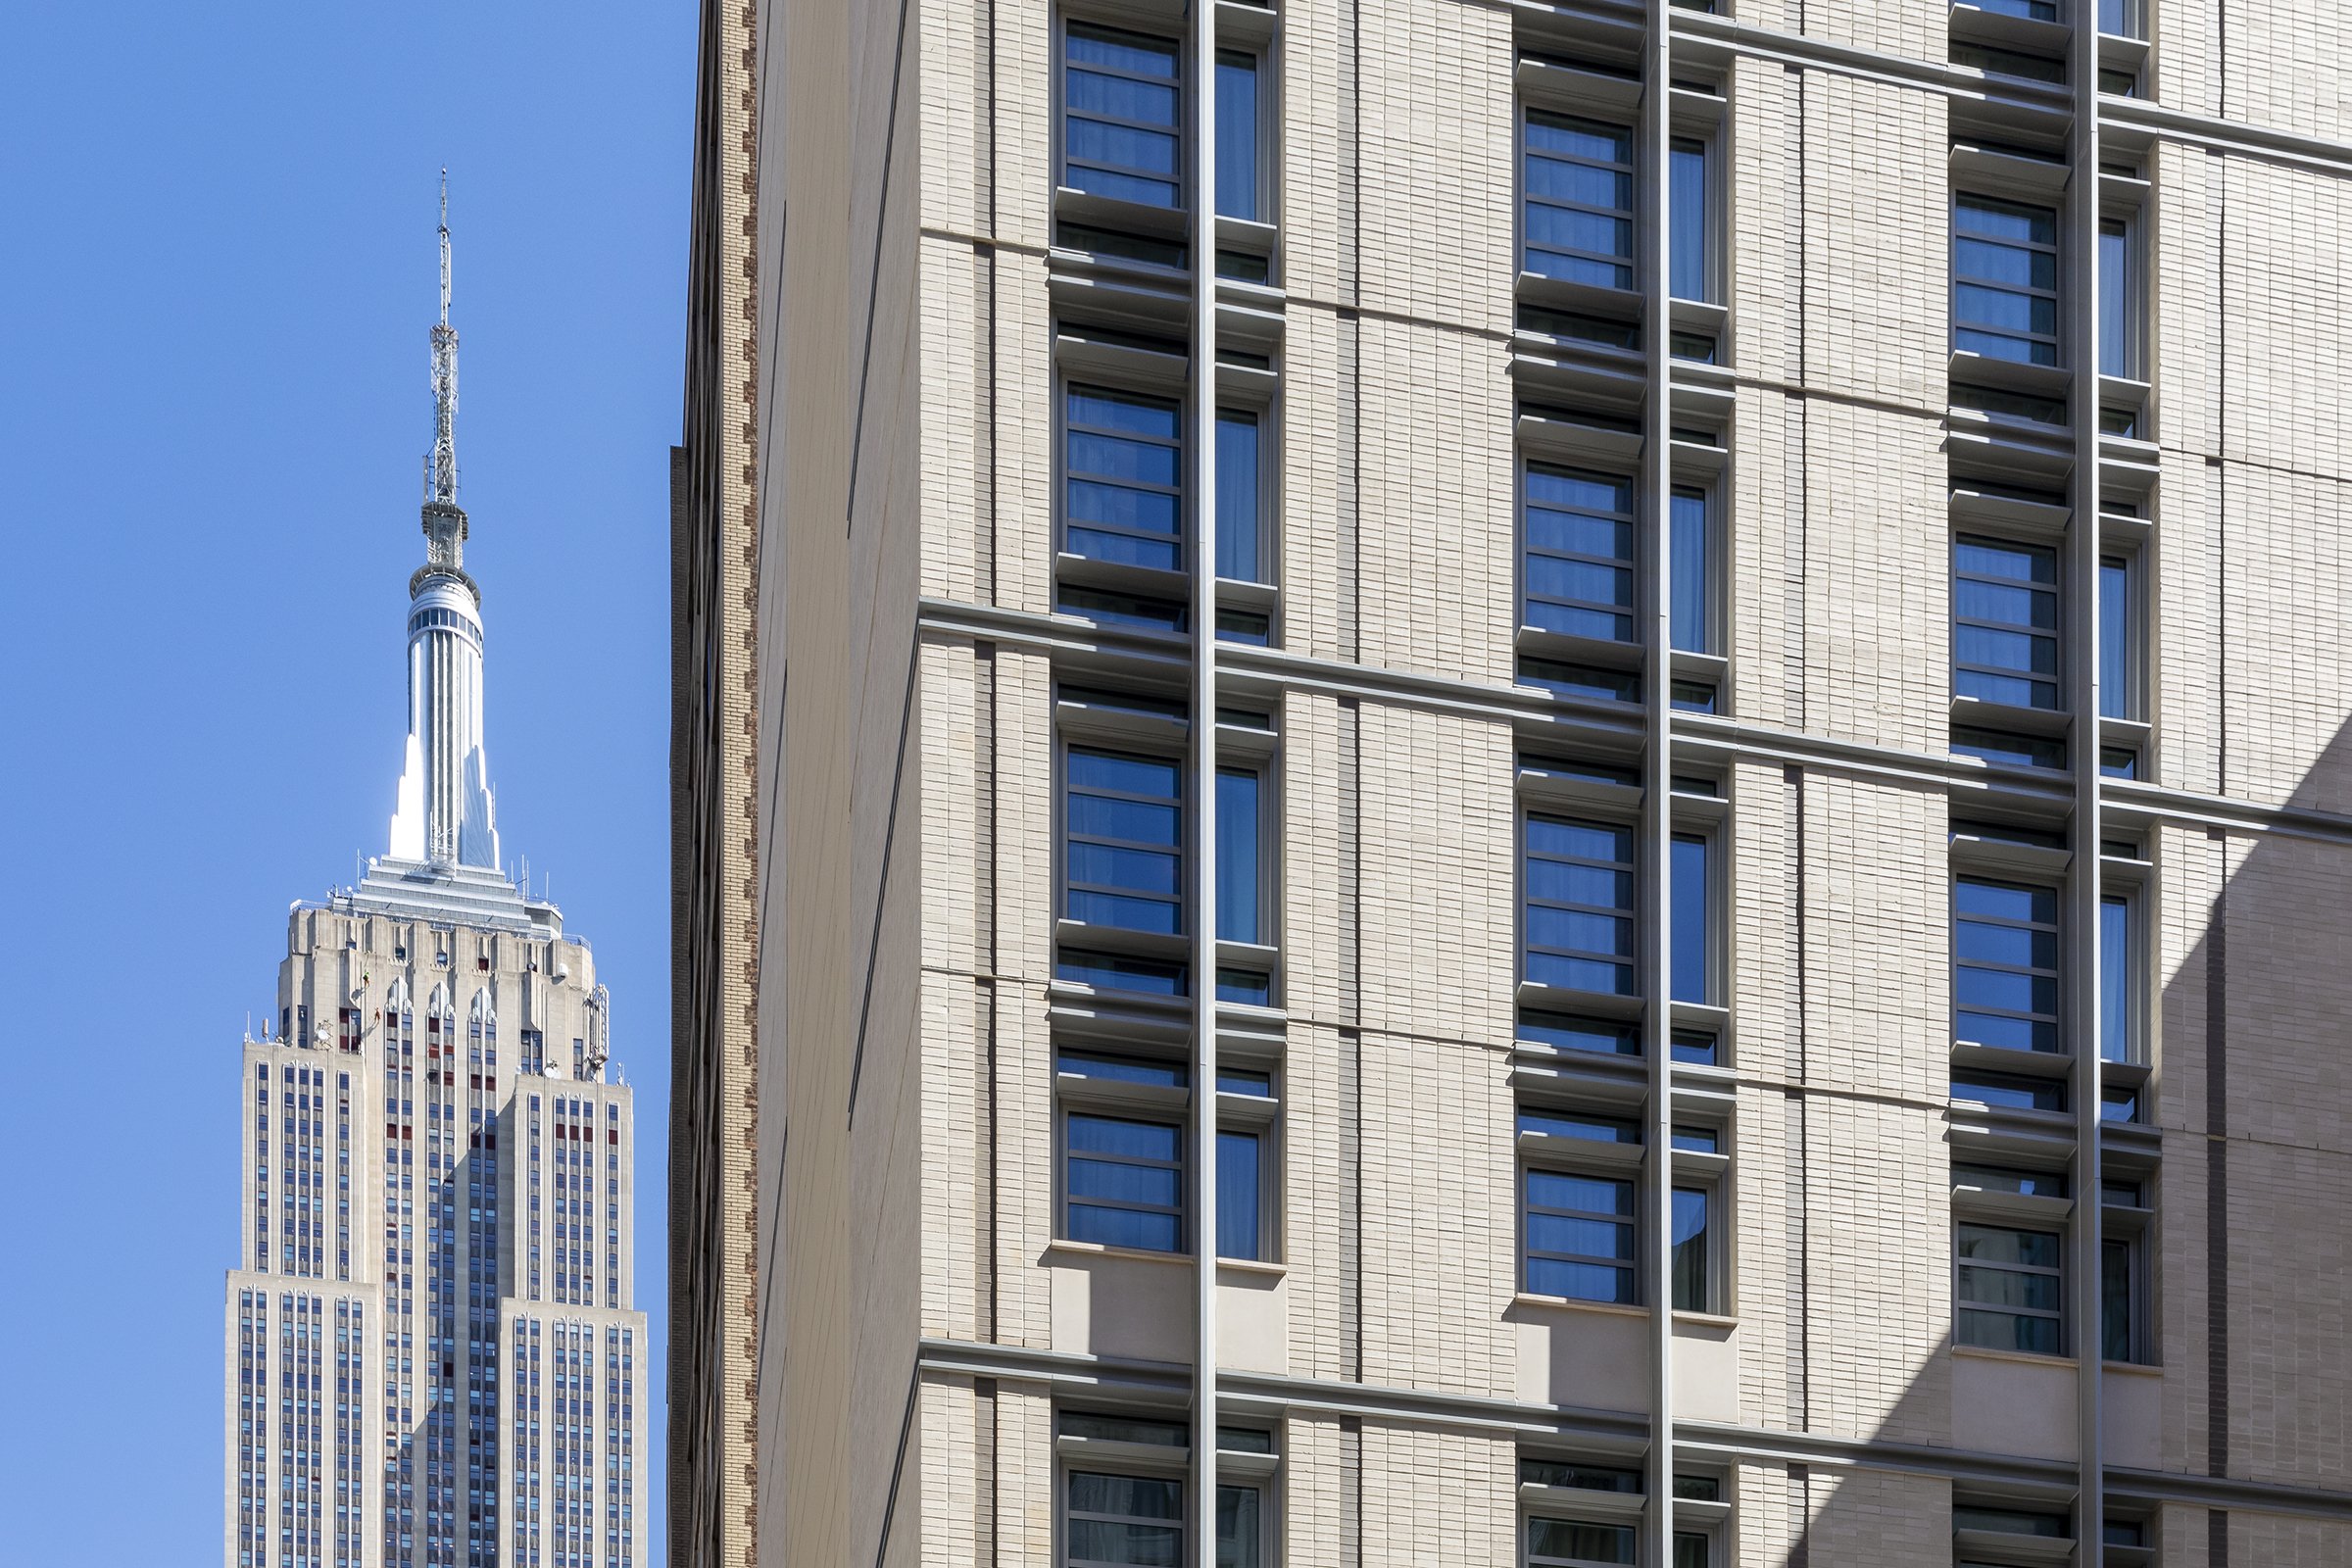 The Fifth Ave Hotel_Photo Ext Supporting Detail Tower 2_Photograph by Andrew Rugge - Copyright Perkins Eastman.jpg